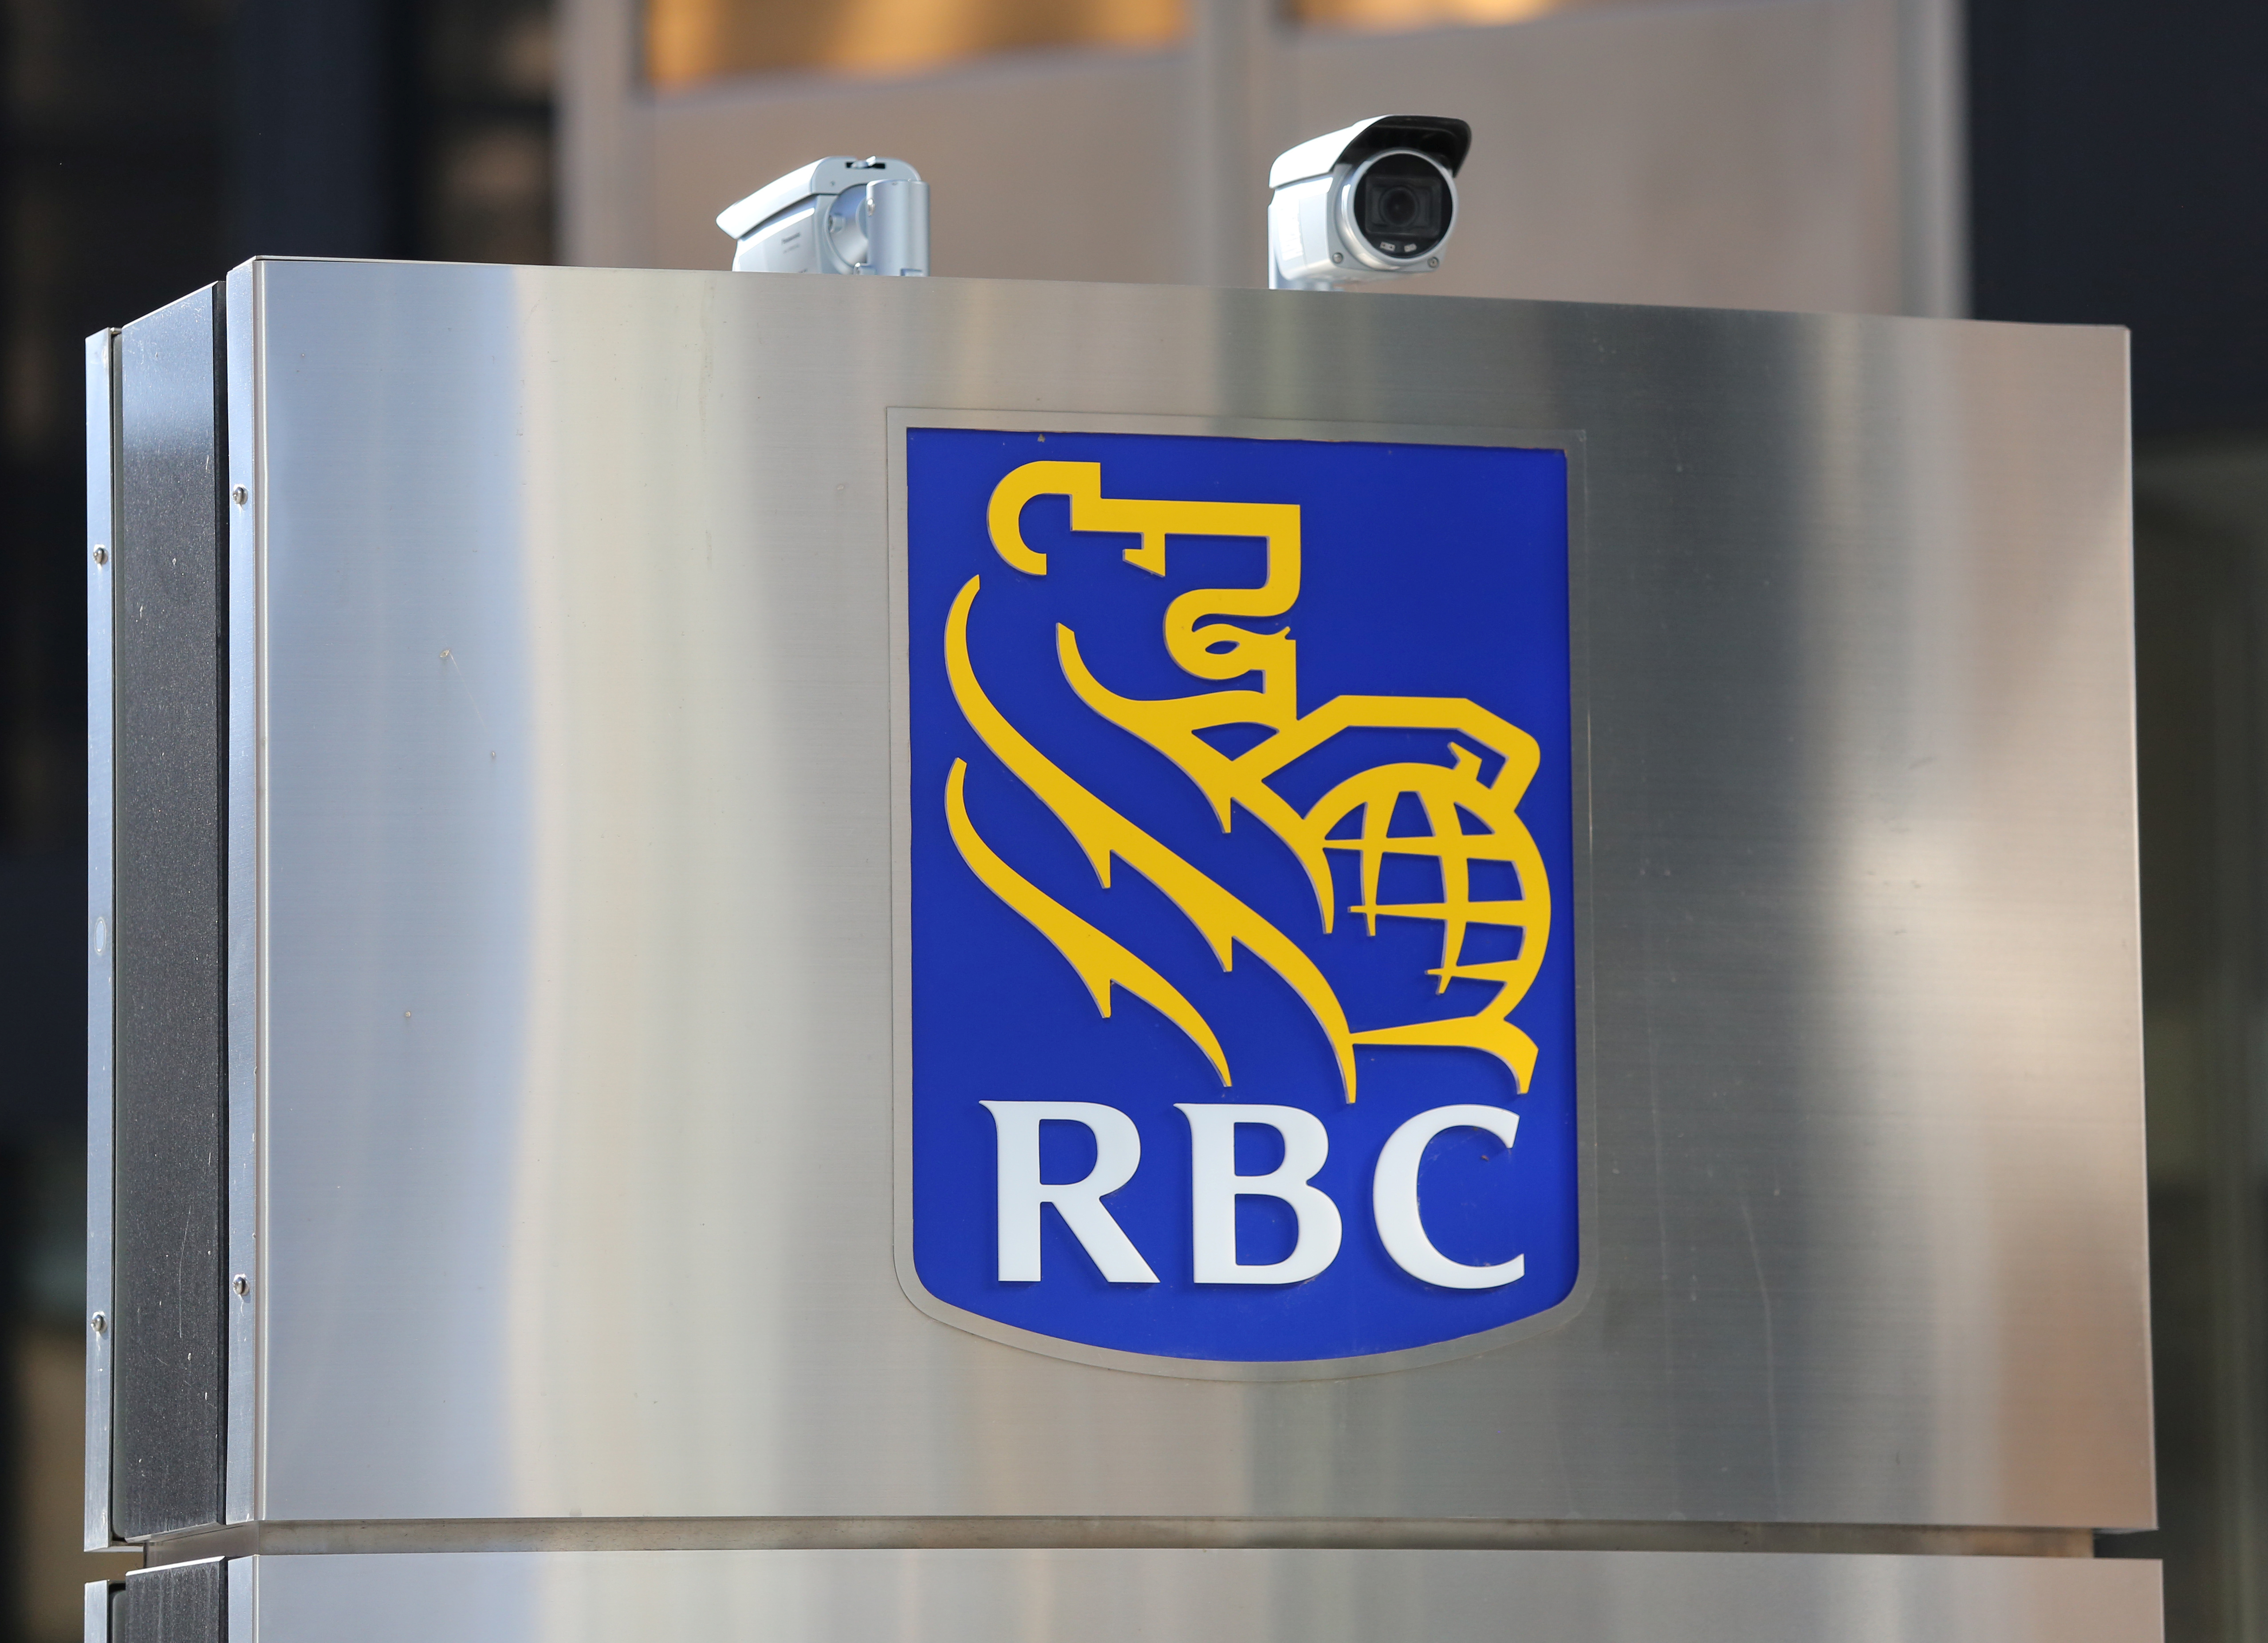 Security cameras point outside the Royal Bank of Canada (RBC) headquarters in Toronto